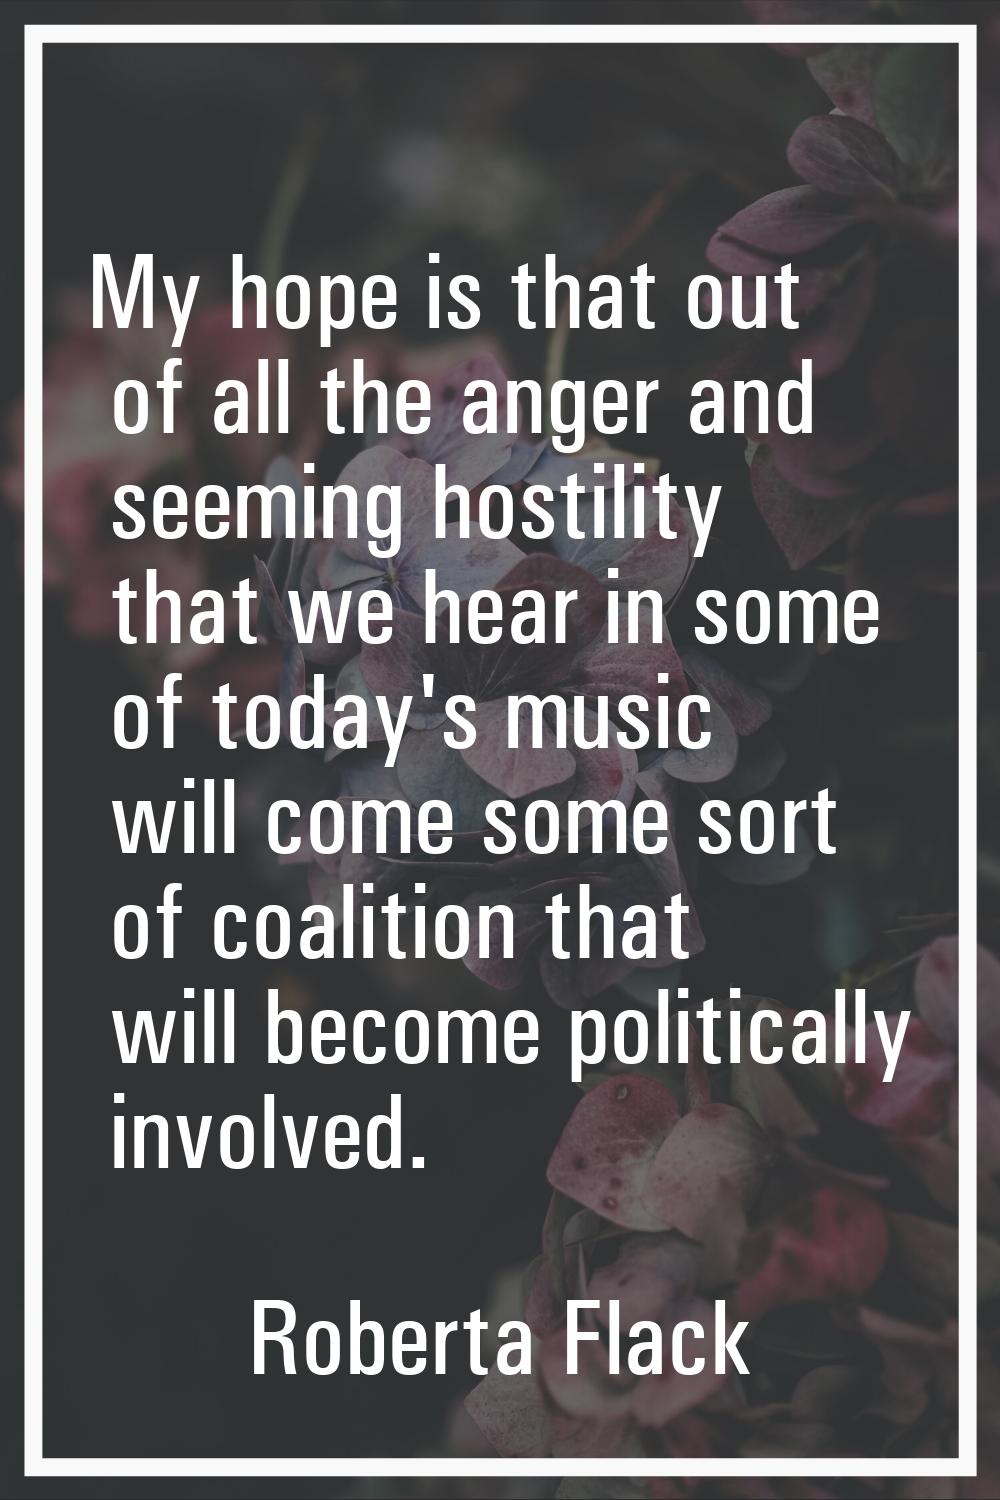 My hope is that out of all the anger and seeming hostility that we hear in some of today's music wi